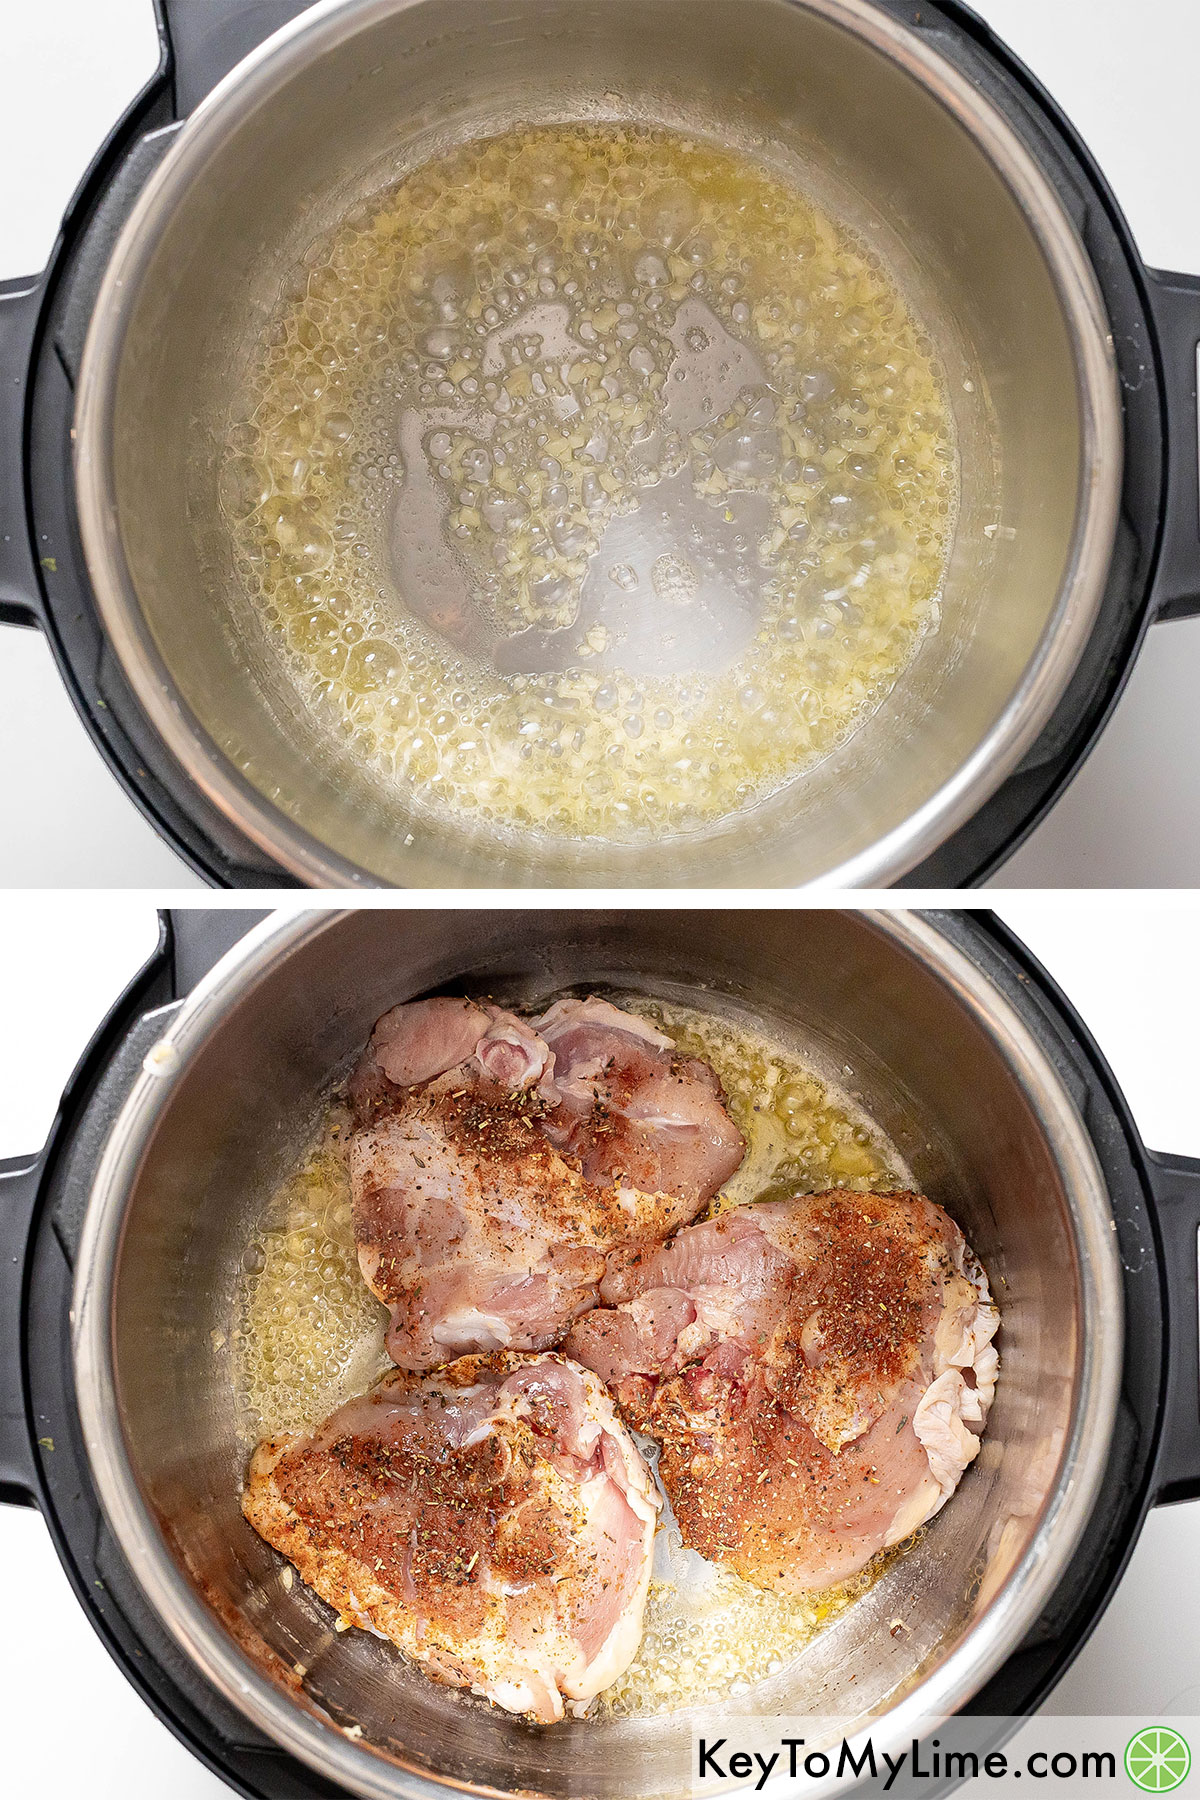 Sauteing garlic in melted butter in the instant pot then once aromatic searing the chicken thighs.